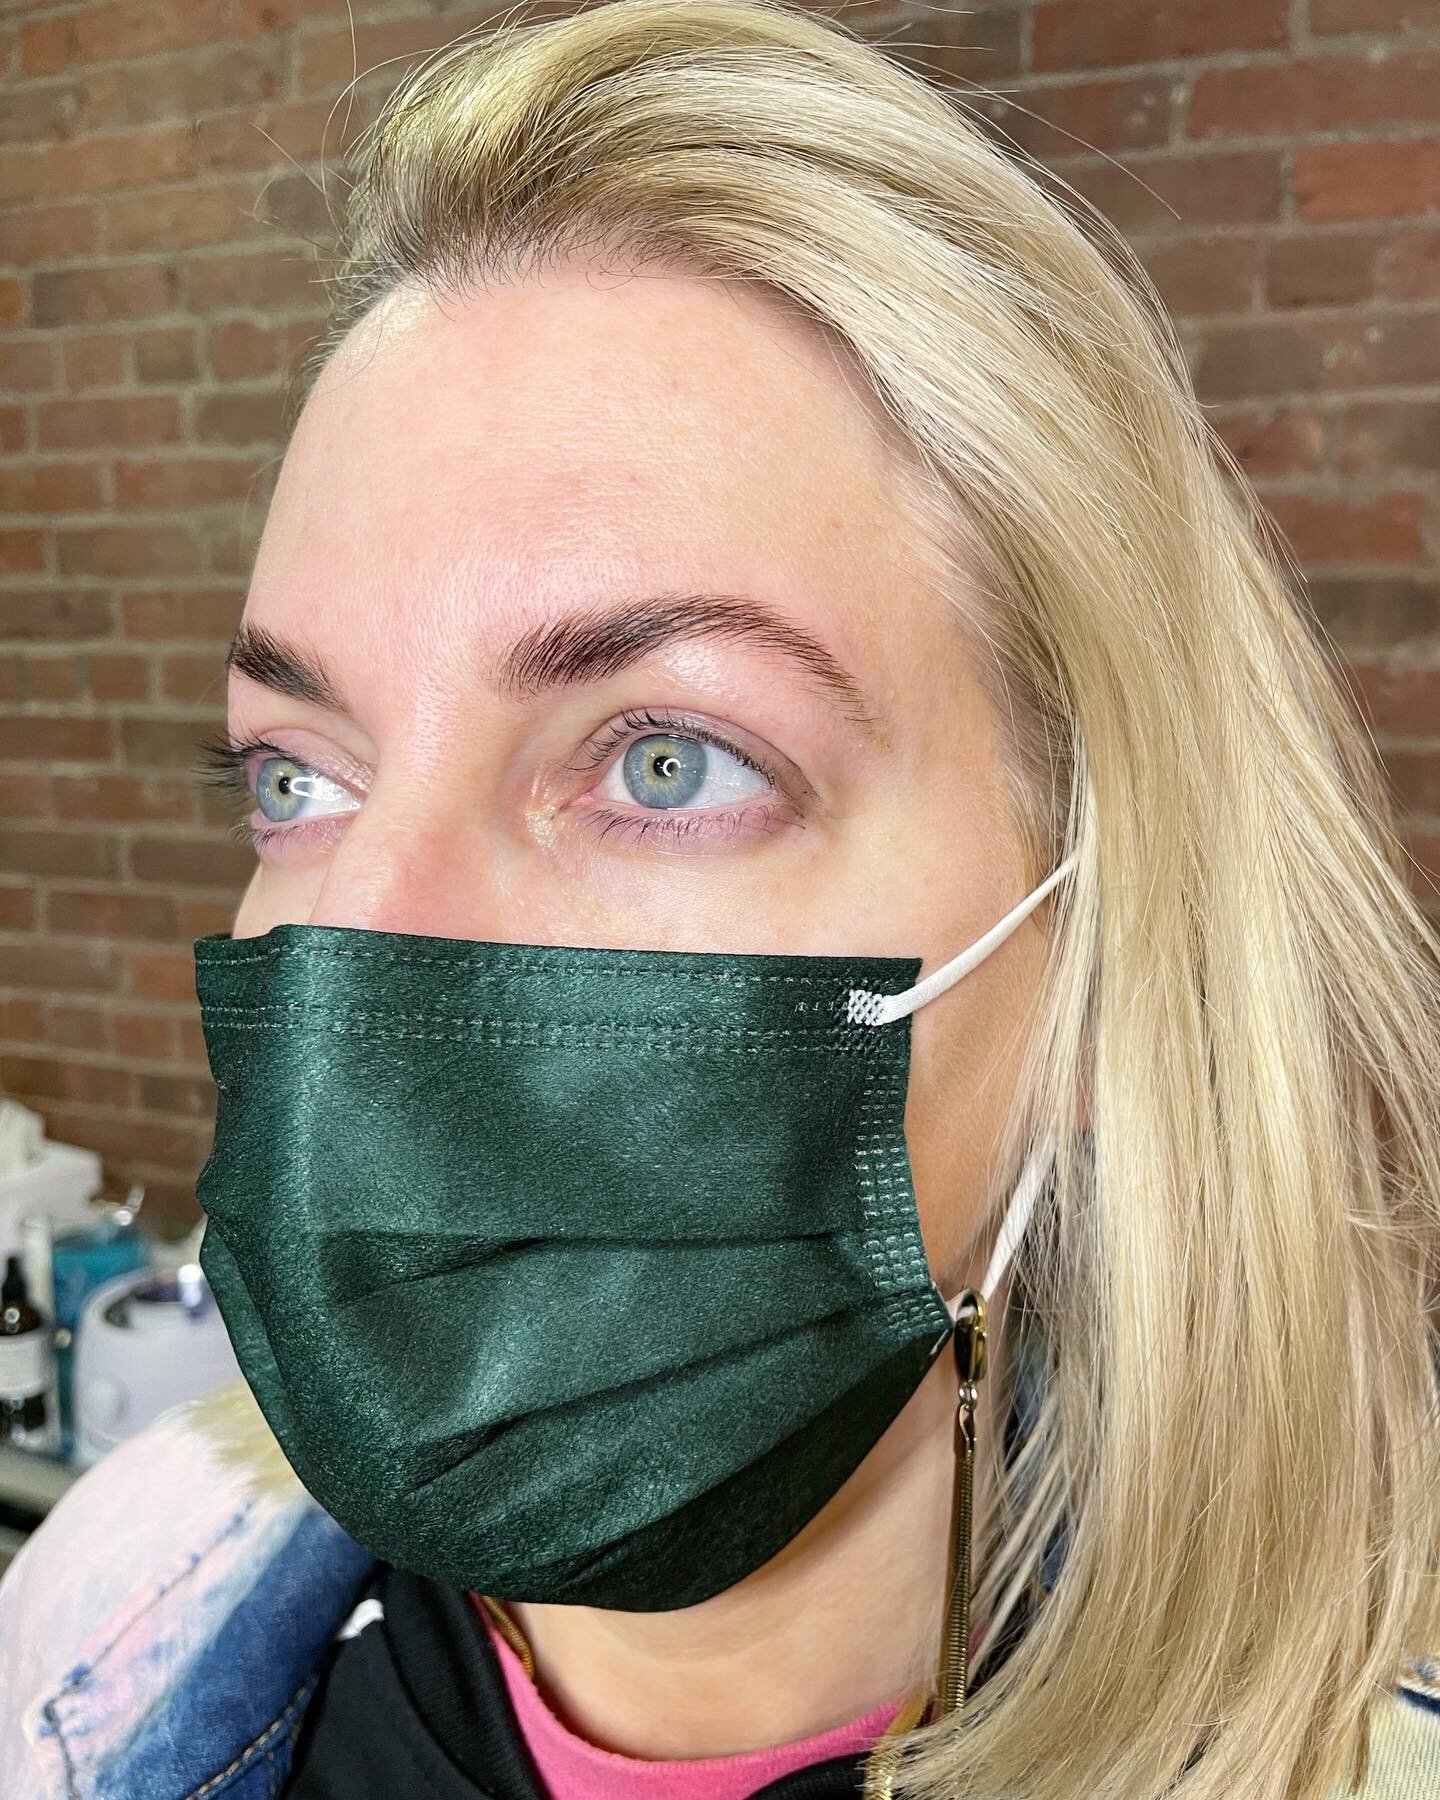 We can't get enough of this brow tint and lamination! Look at how much those darker, bold brows make her gorgeous blue eyes pop! 😻🔥

#browtiste #browlamination #boldbrows #fullbrows #browshaping #browtweezing #browtinting #browtransformation #broww